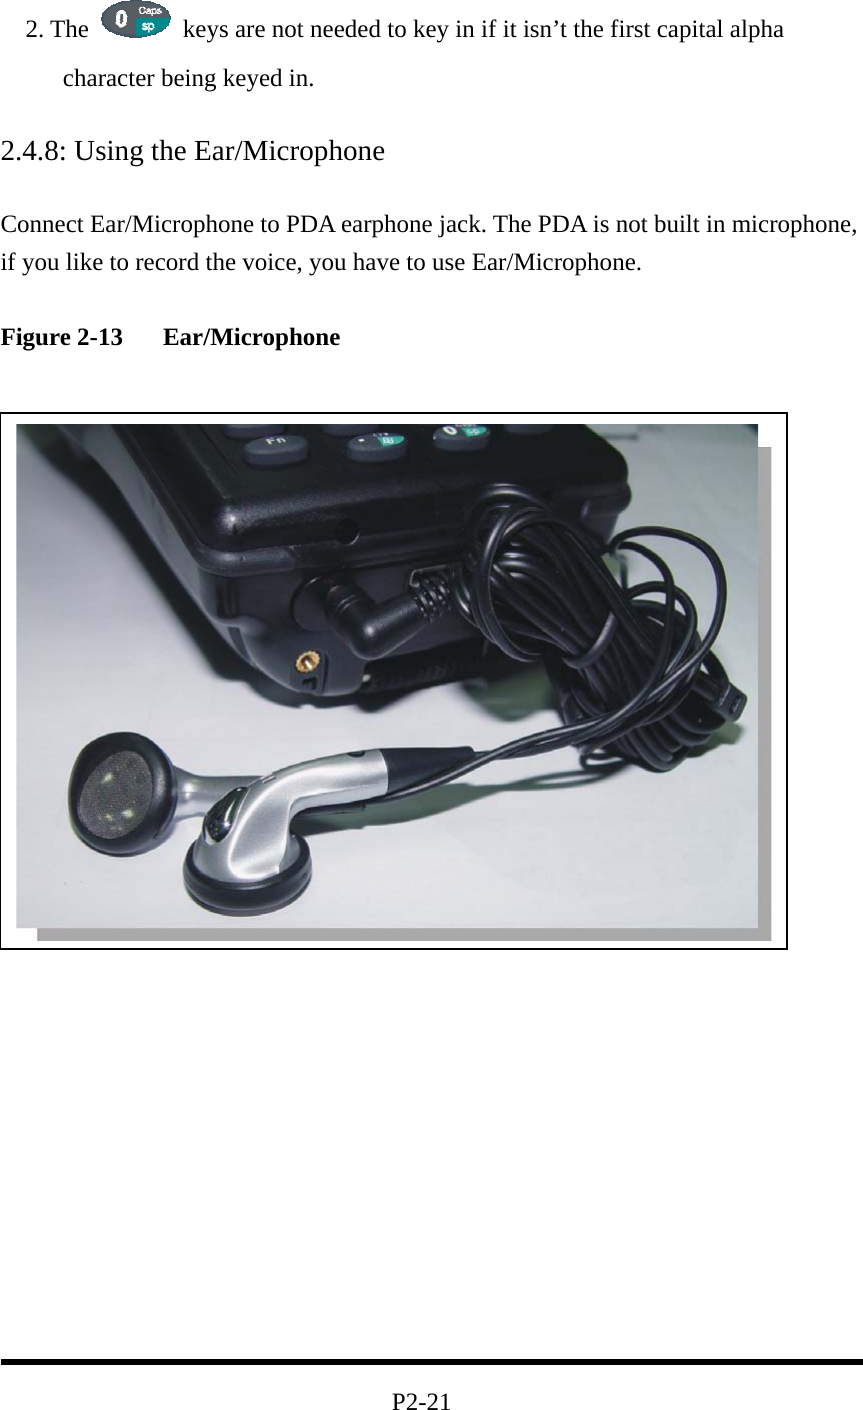   2. The    keys are not needed to key in if it isn’t the first capital alpha character being keyed in.  2.4.8: Using the Ear/Microphone  Connect Ear/Microphone to PDA earphone jack. The PDA is not built in microphone, if you like to record the voice, you have to use Ear/Microphone.    Figure 2-13   Ear/Microphone                 2.5: Navigating the Display  2.5.1: Setting the Date and Time                                          P2-21 